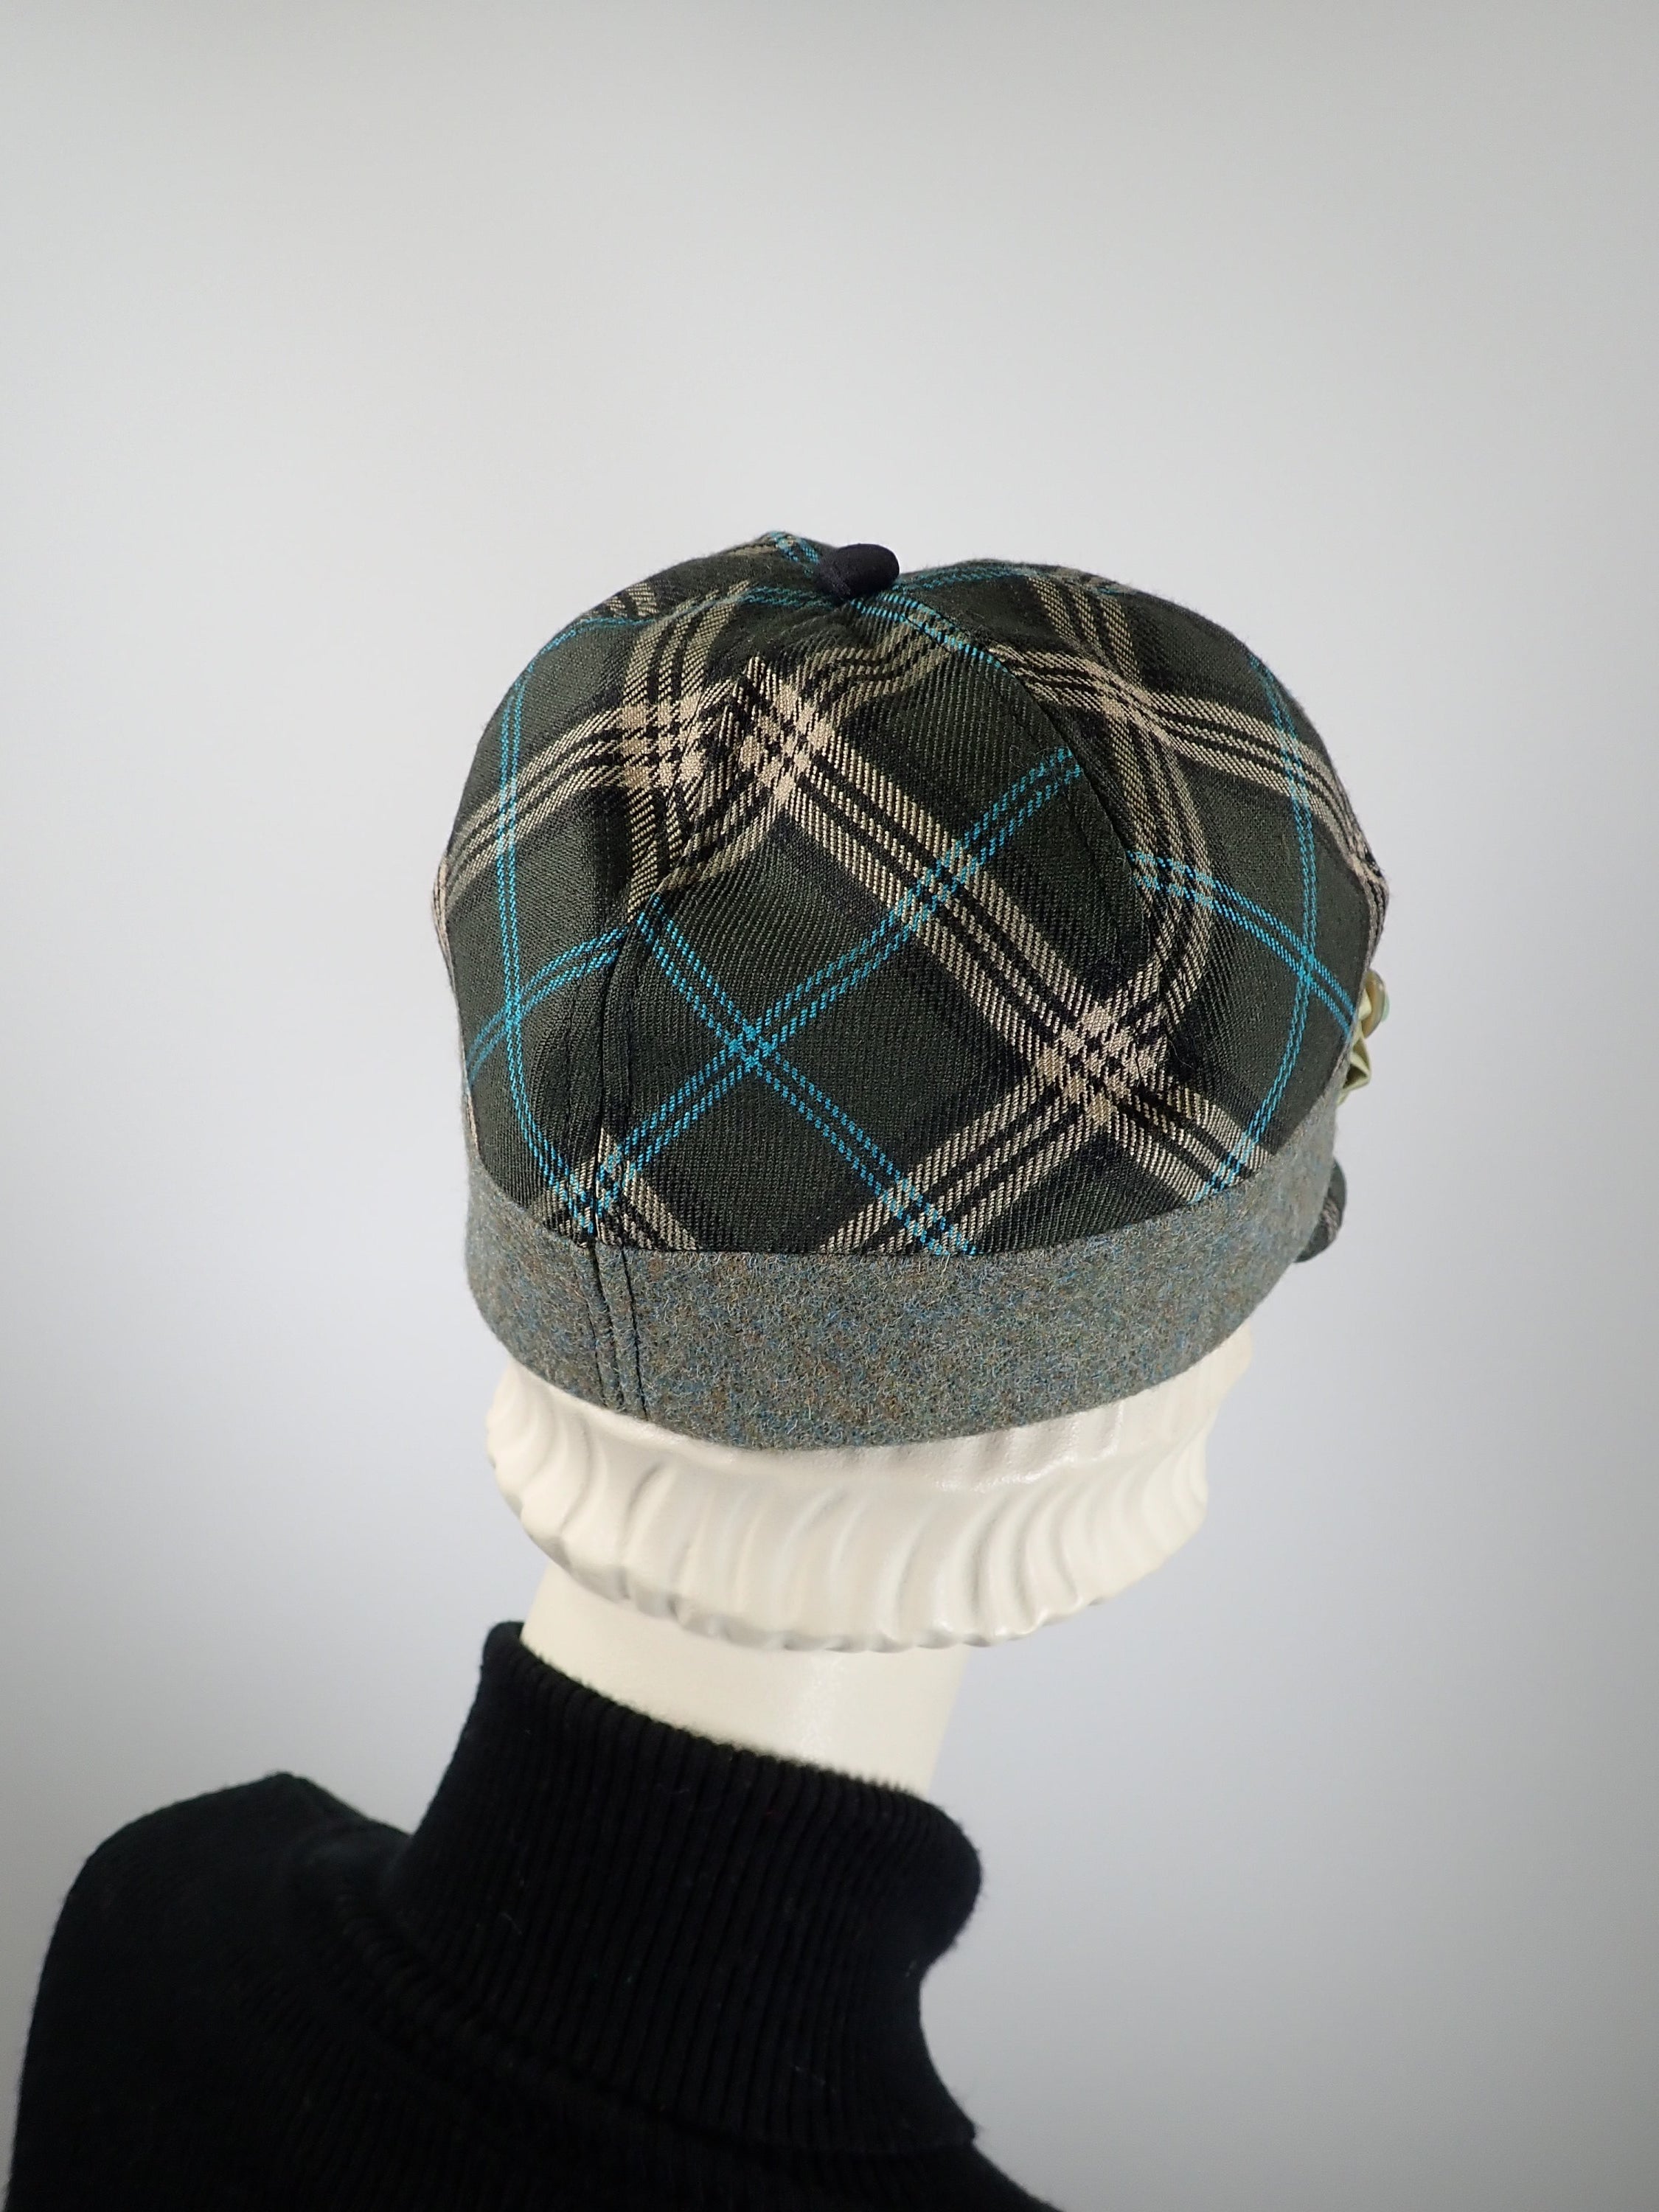 Women's plaid winter hat baseball style. Casual Newsboy hat green and camel. Warm stylish fabric comfy hat. Ladies soft hat.